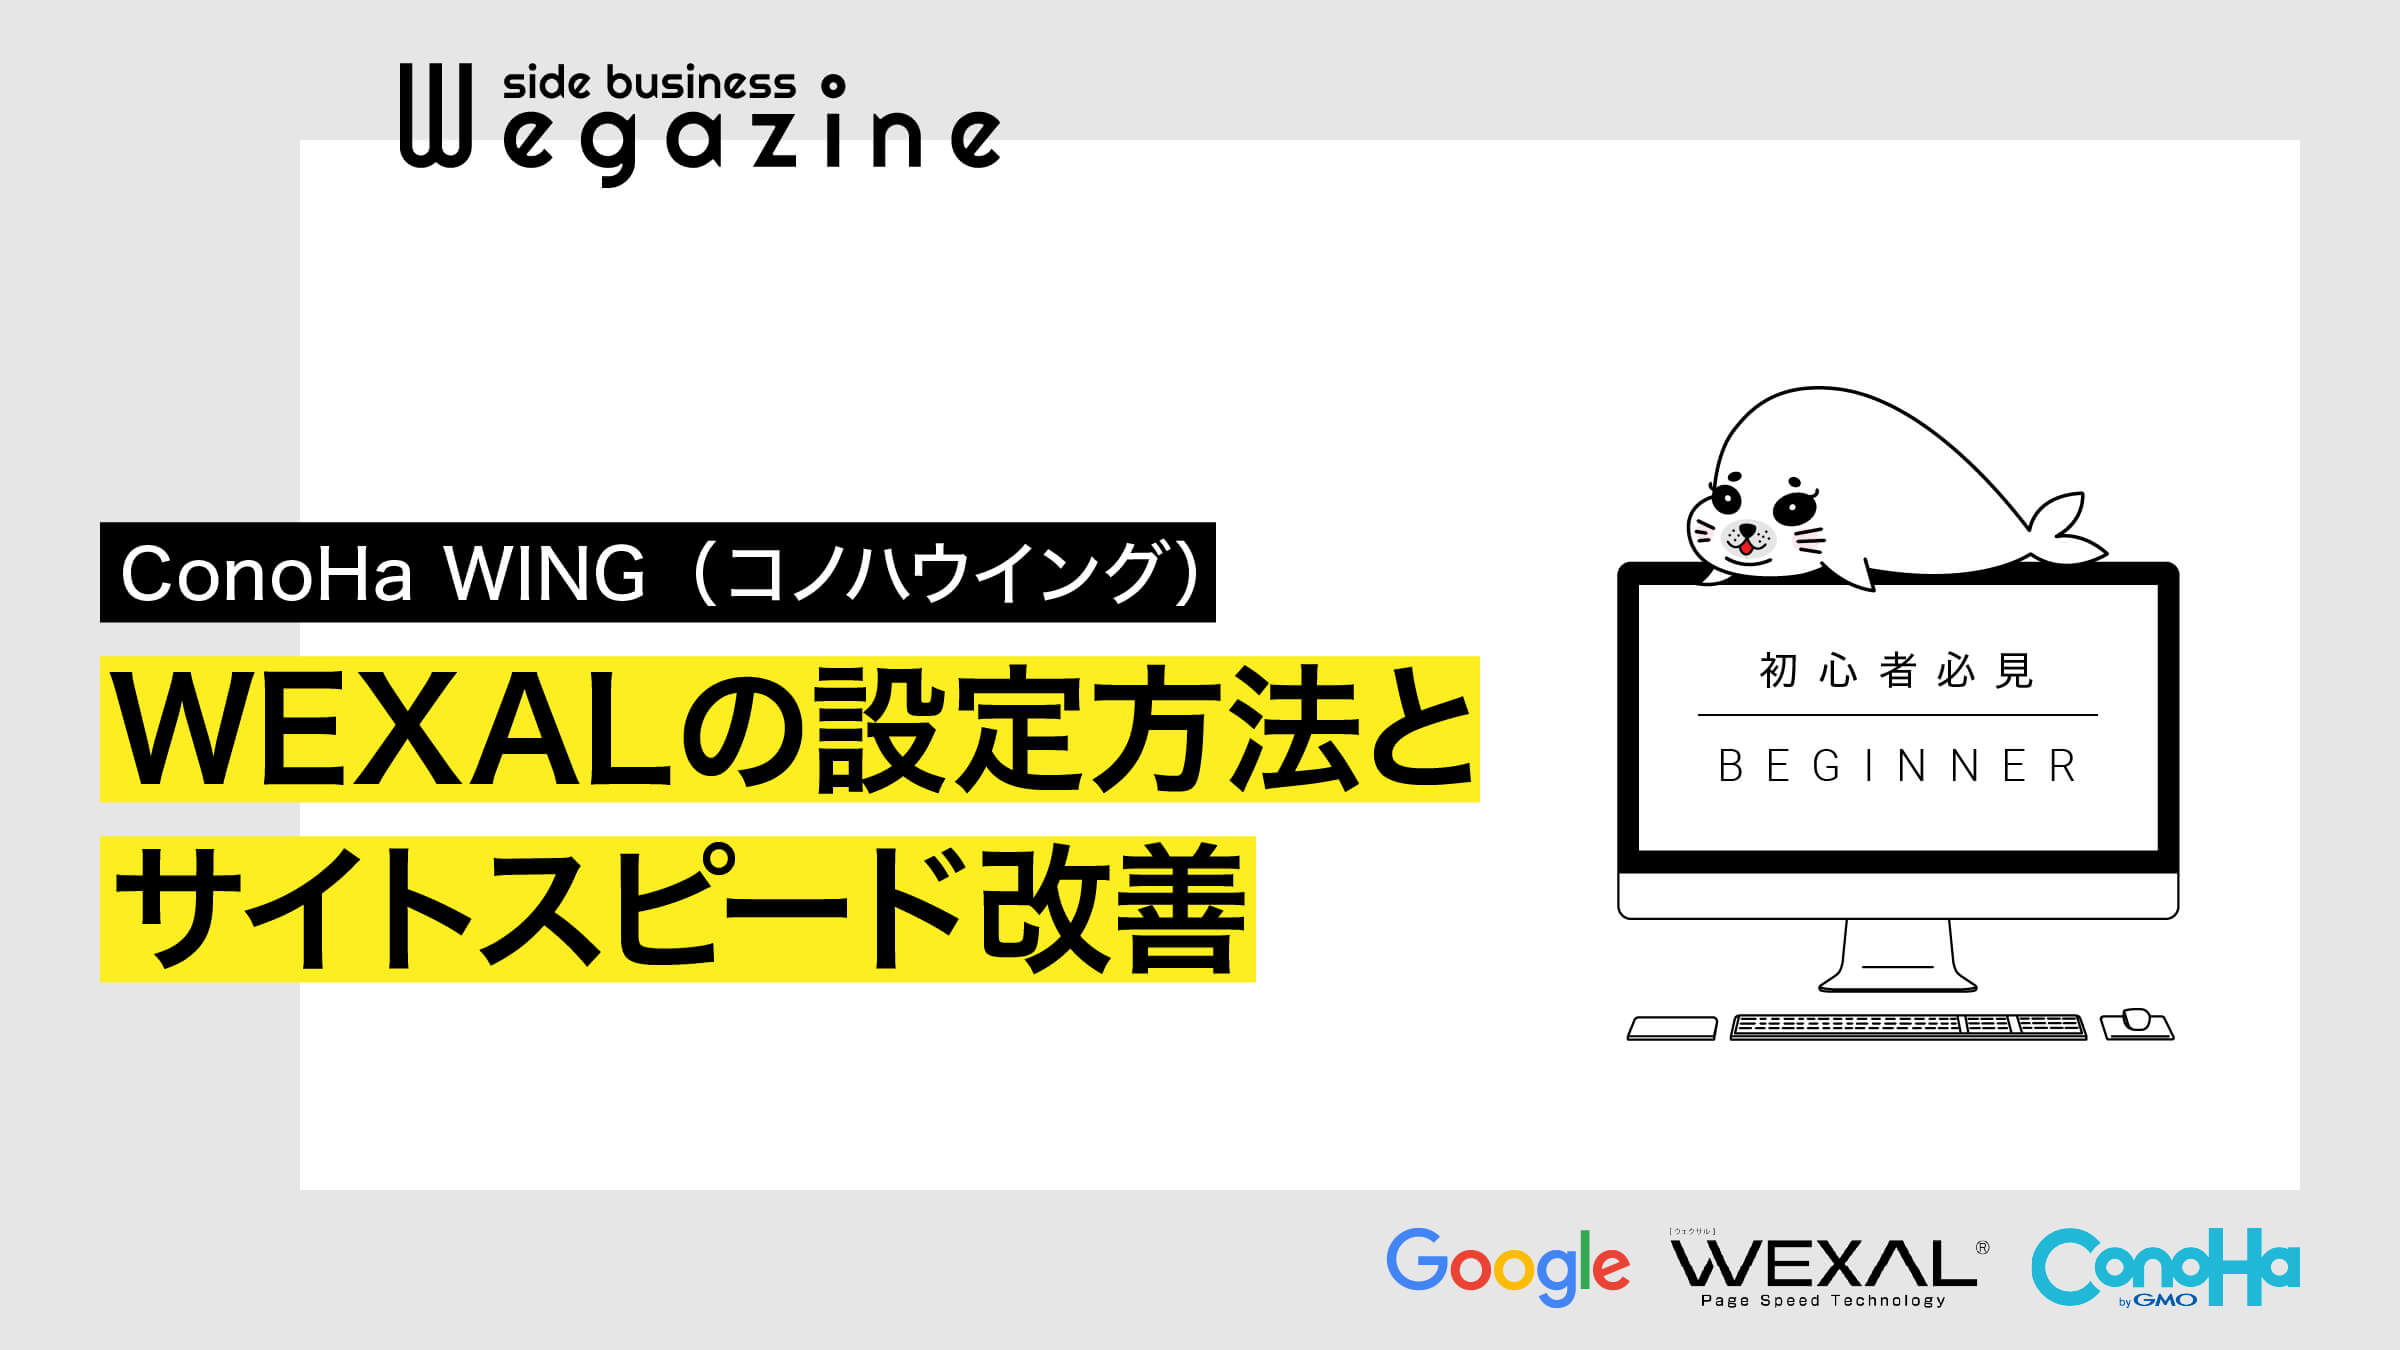 【ConoHa WING】WEXALの設定方法とサイトスピード改善